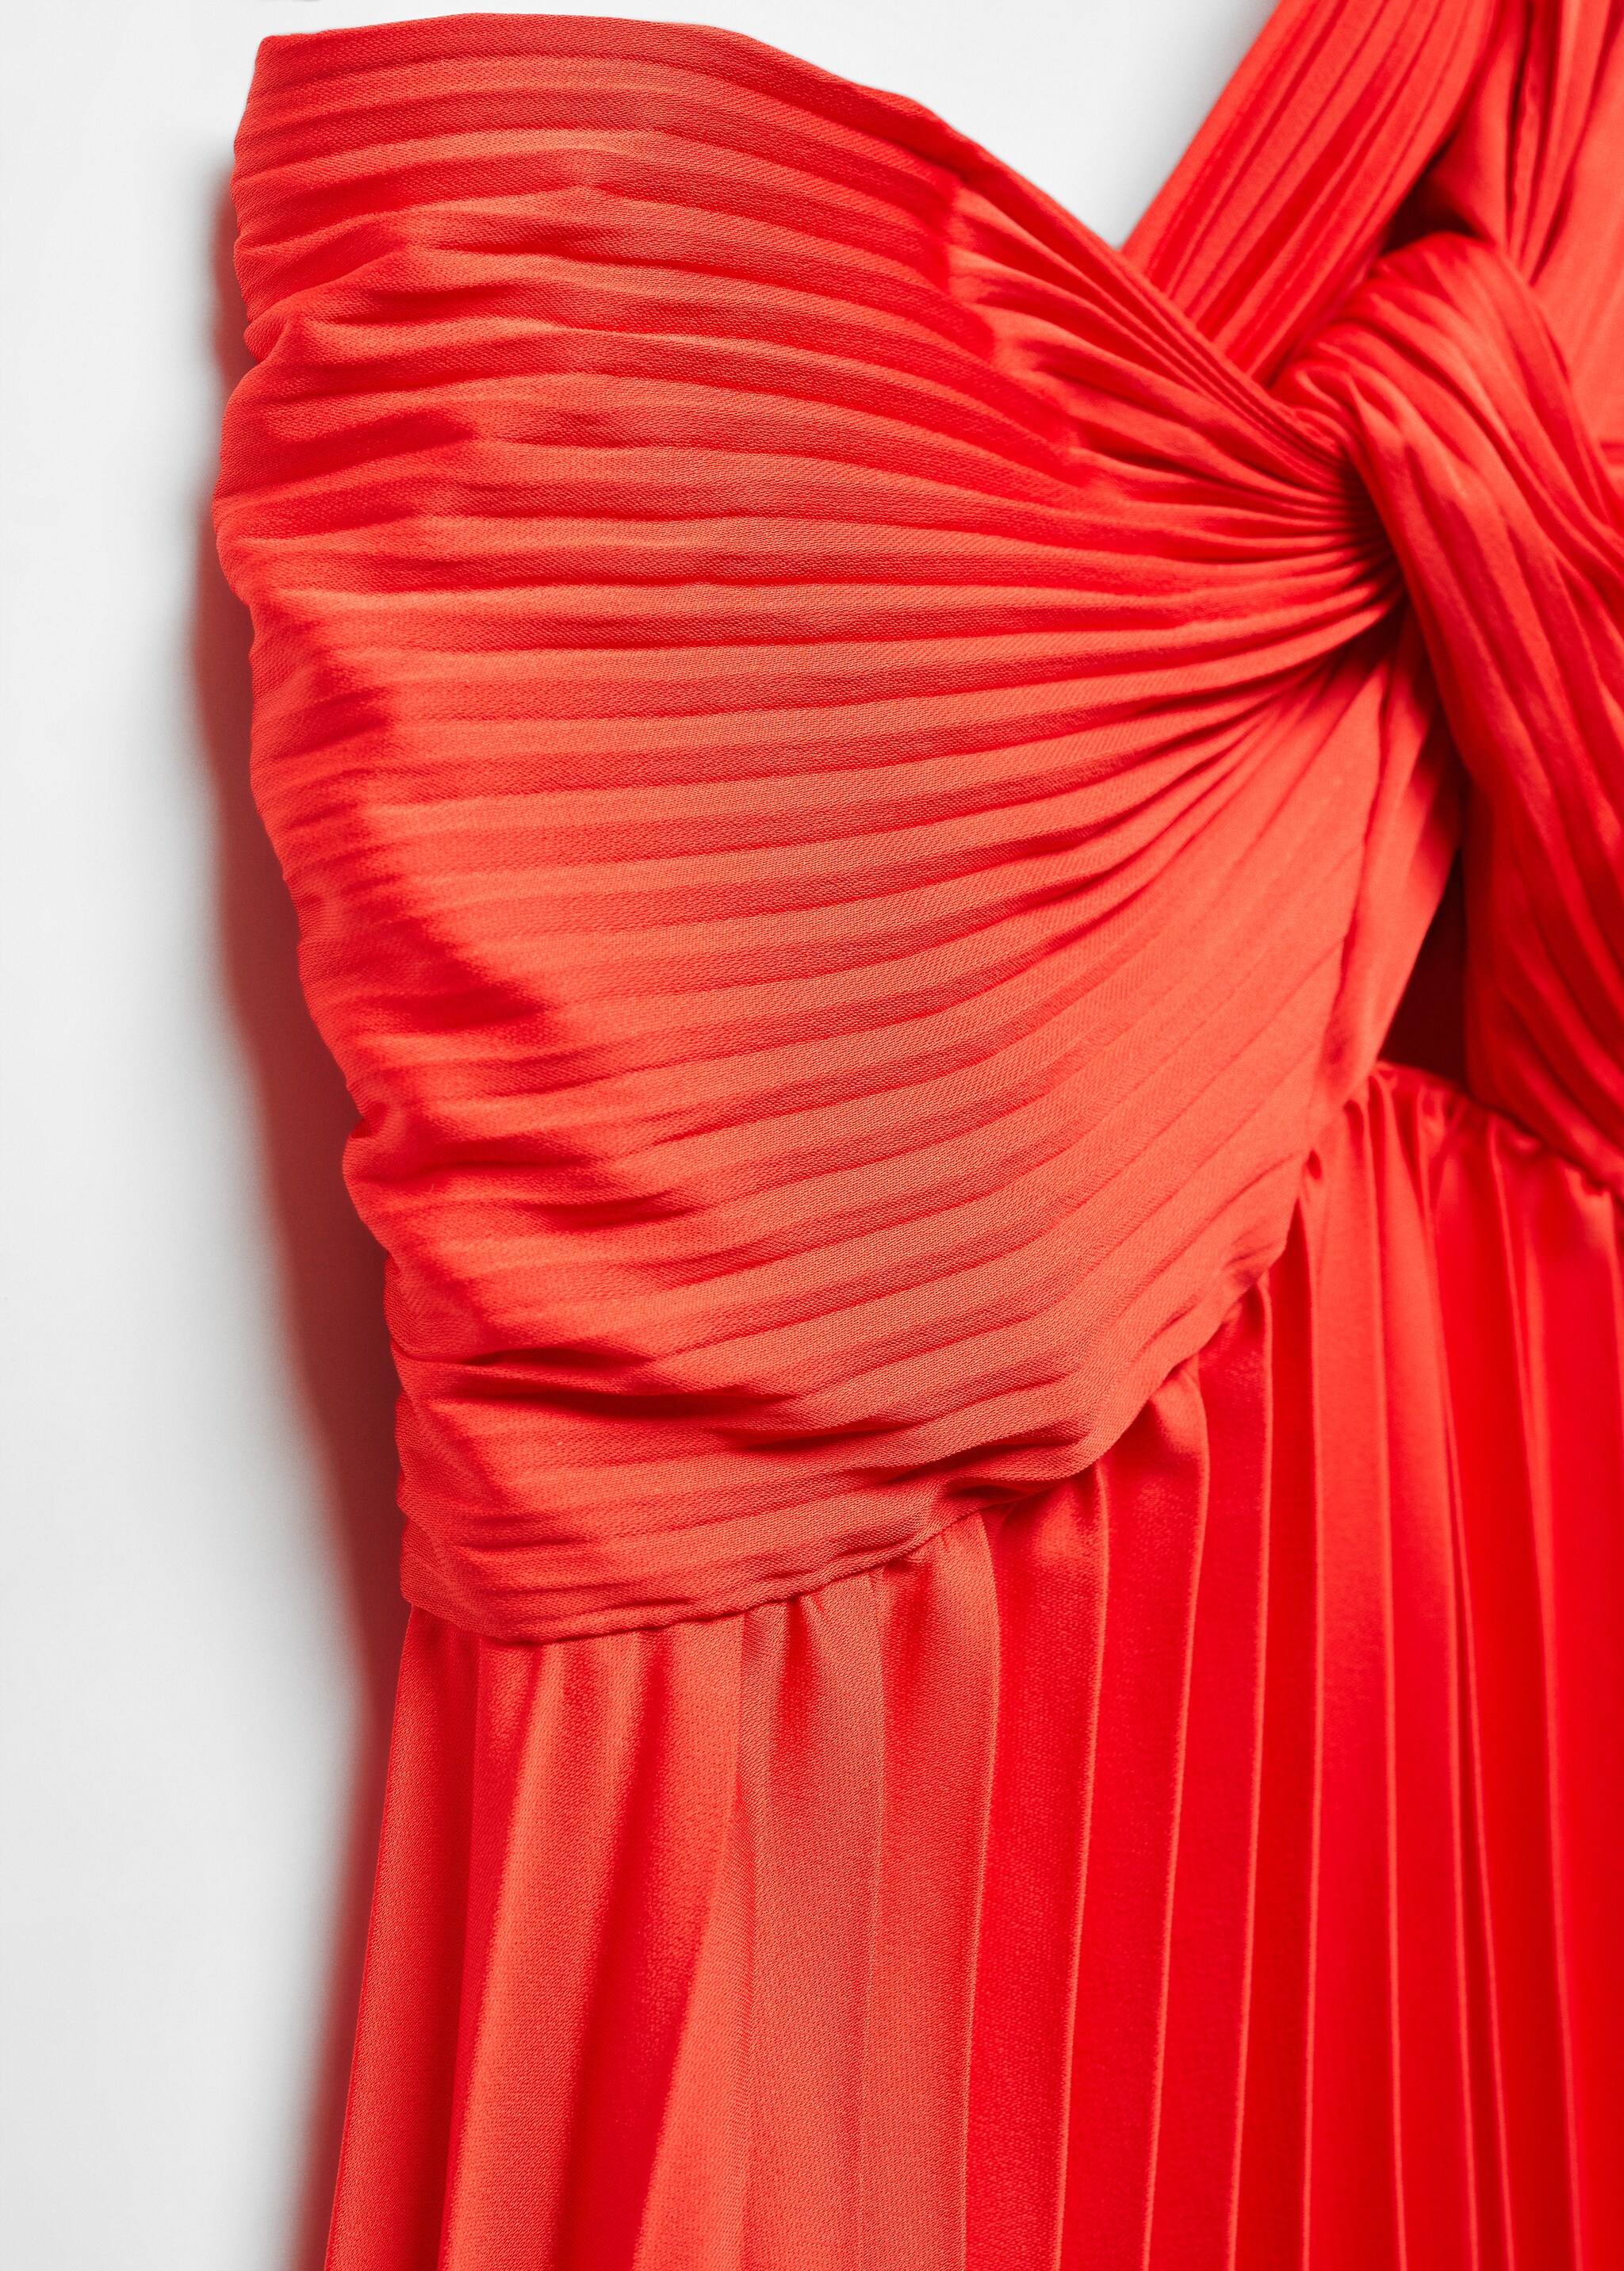 Asymmetrical pleated dress - Details of the article 8